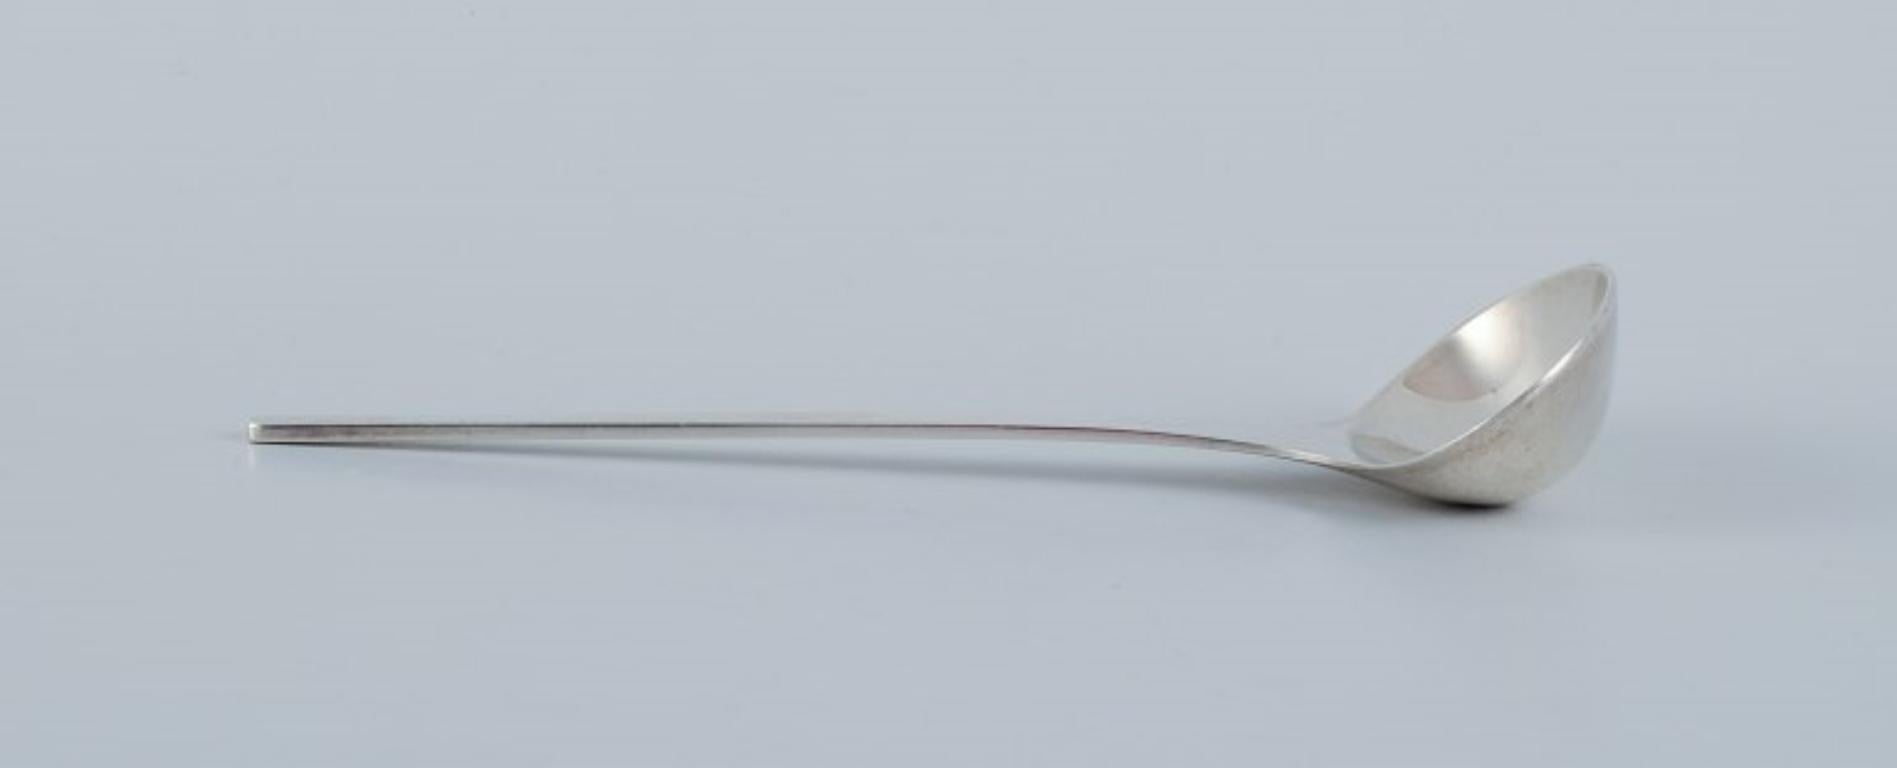 Georg Jensen, Caravel, a sauce spoon in sterling silver. 
Modernist and sleek design.
Designed by Henning Koppel.
From the 1960s.
Stamped with the hallmark used after 1944.
In excellent condition.
Dimensions: L 18.3 cm.